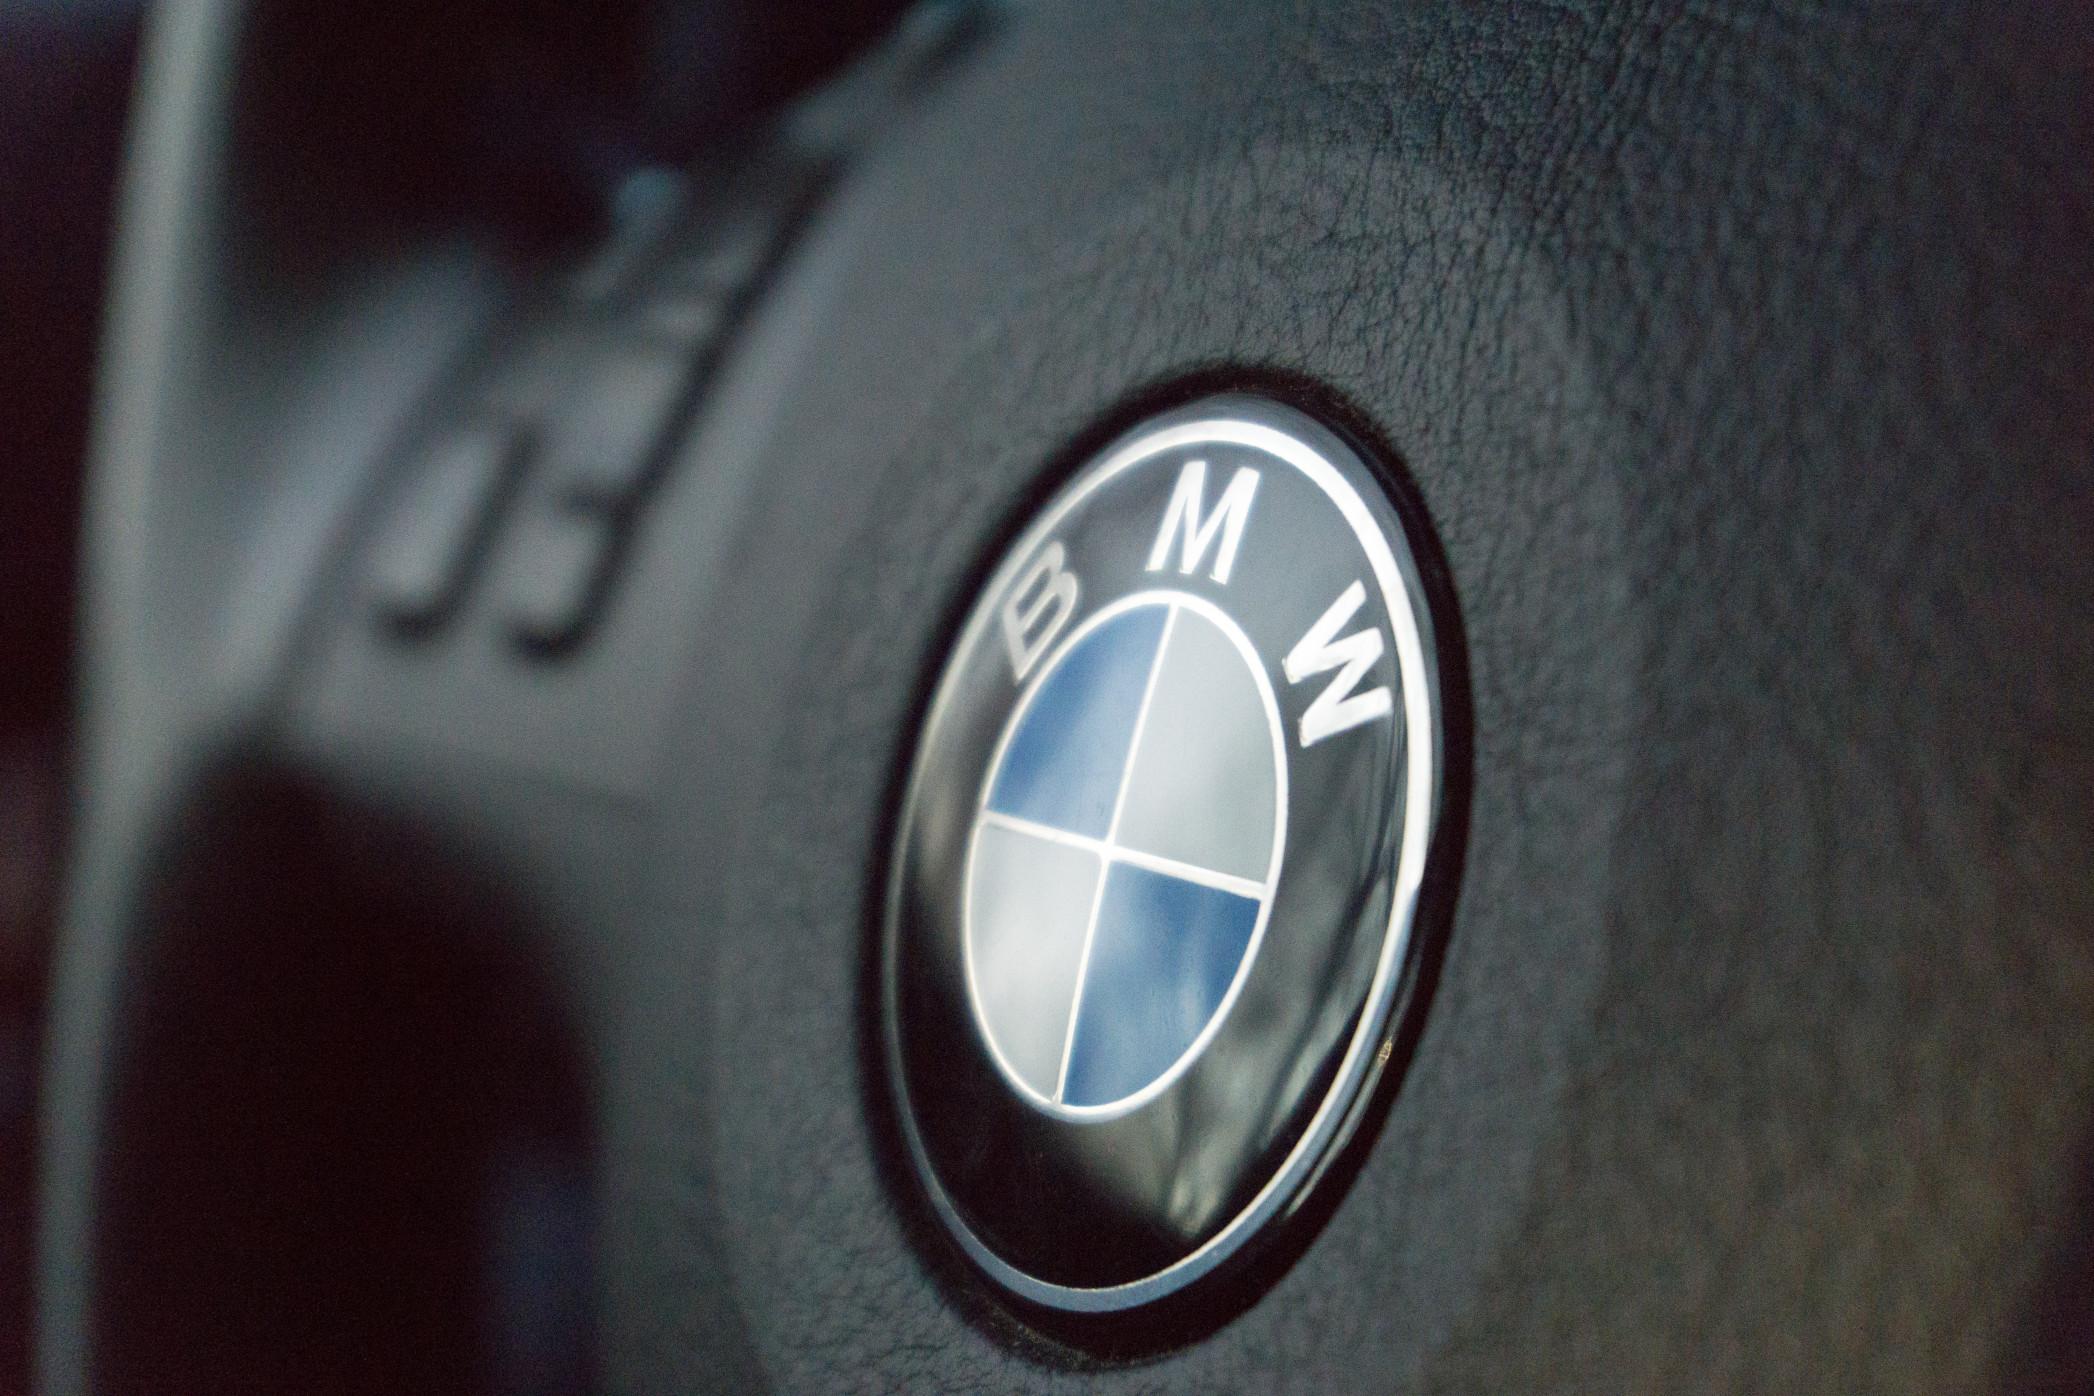 A closeup of a BMW logo on a steering wheel.